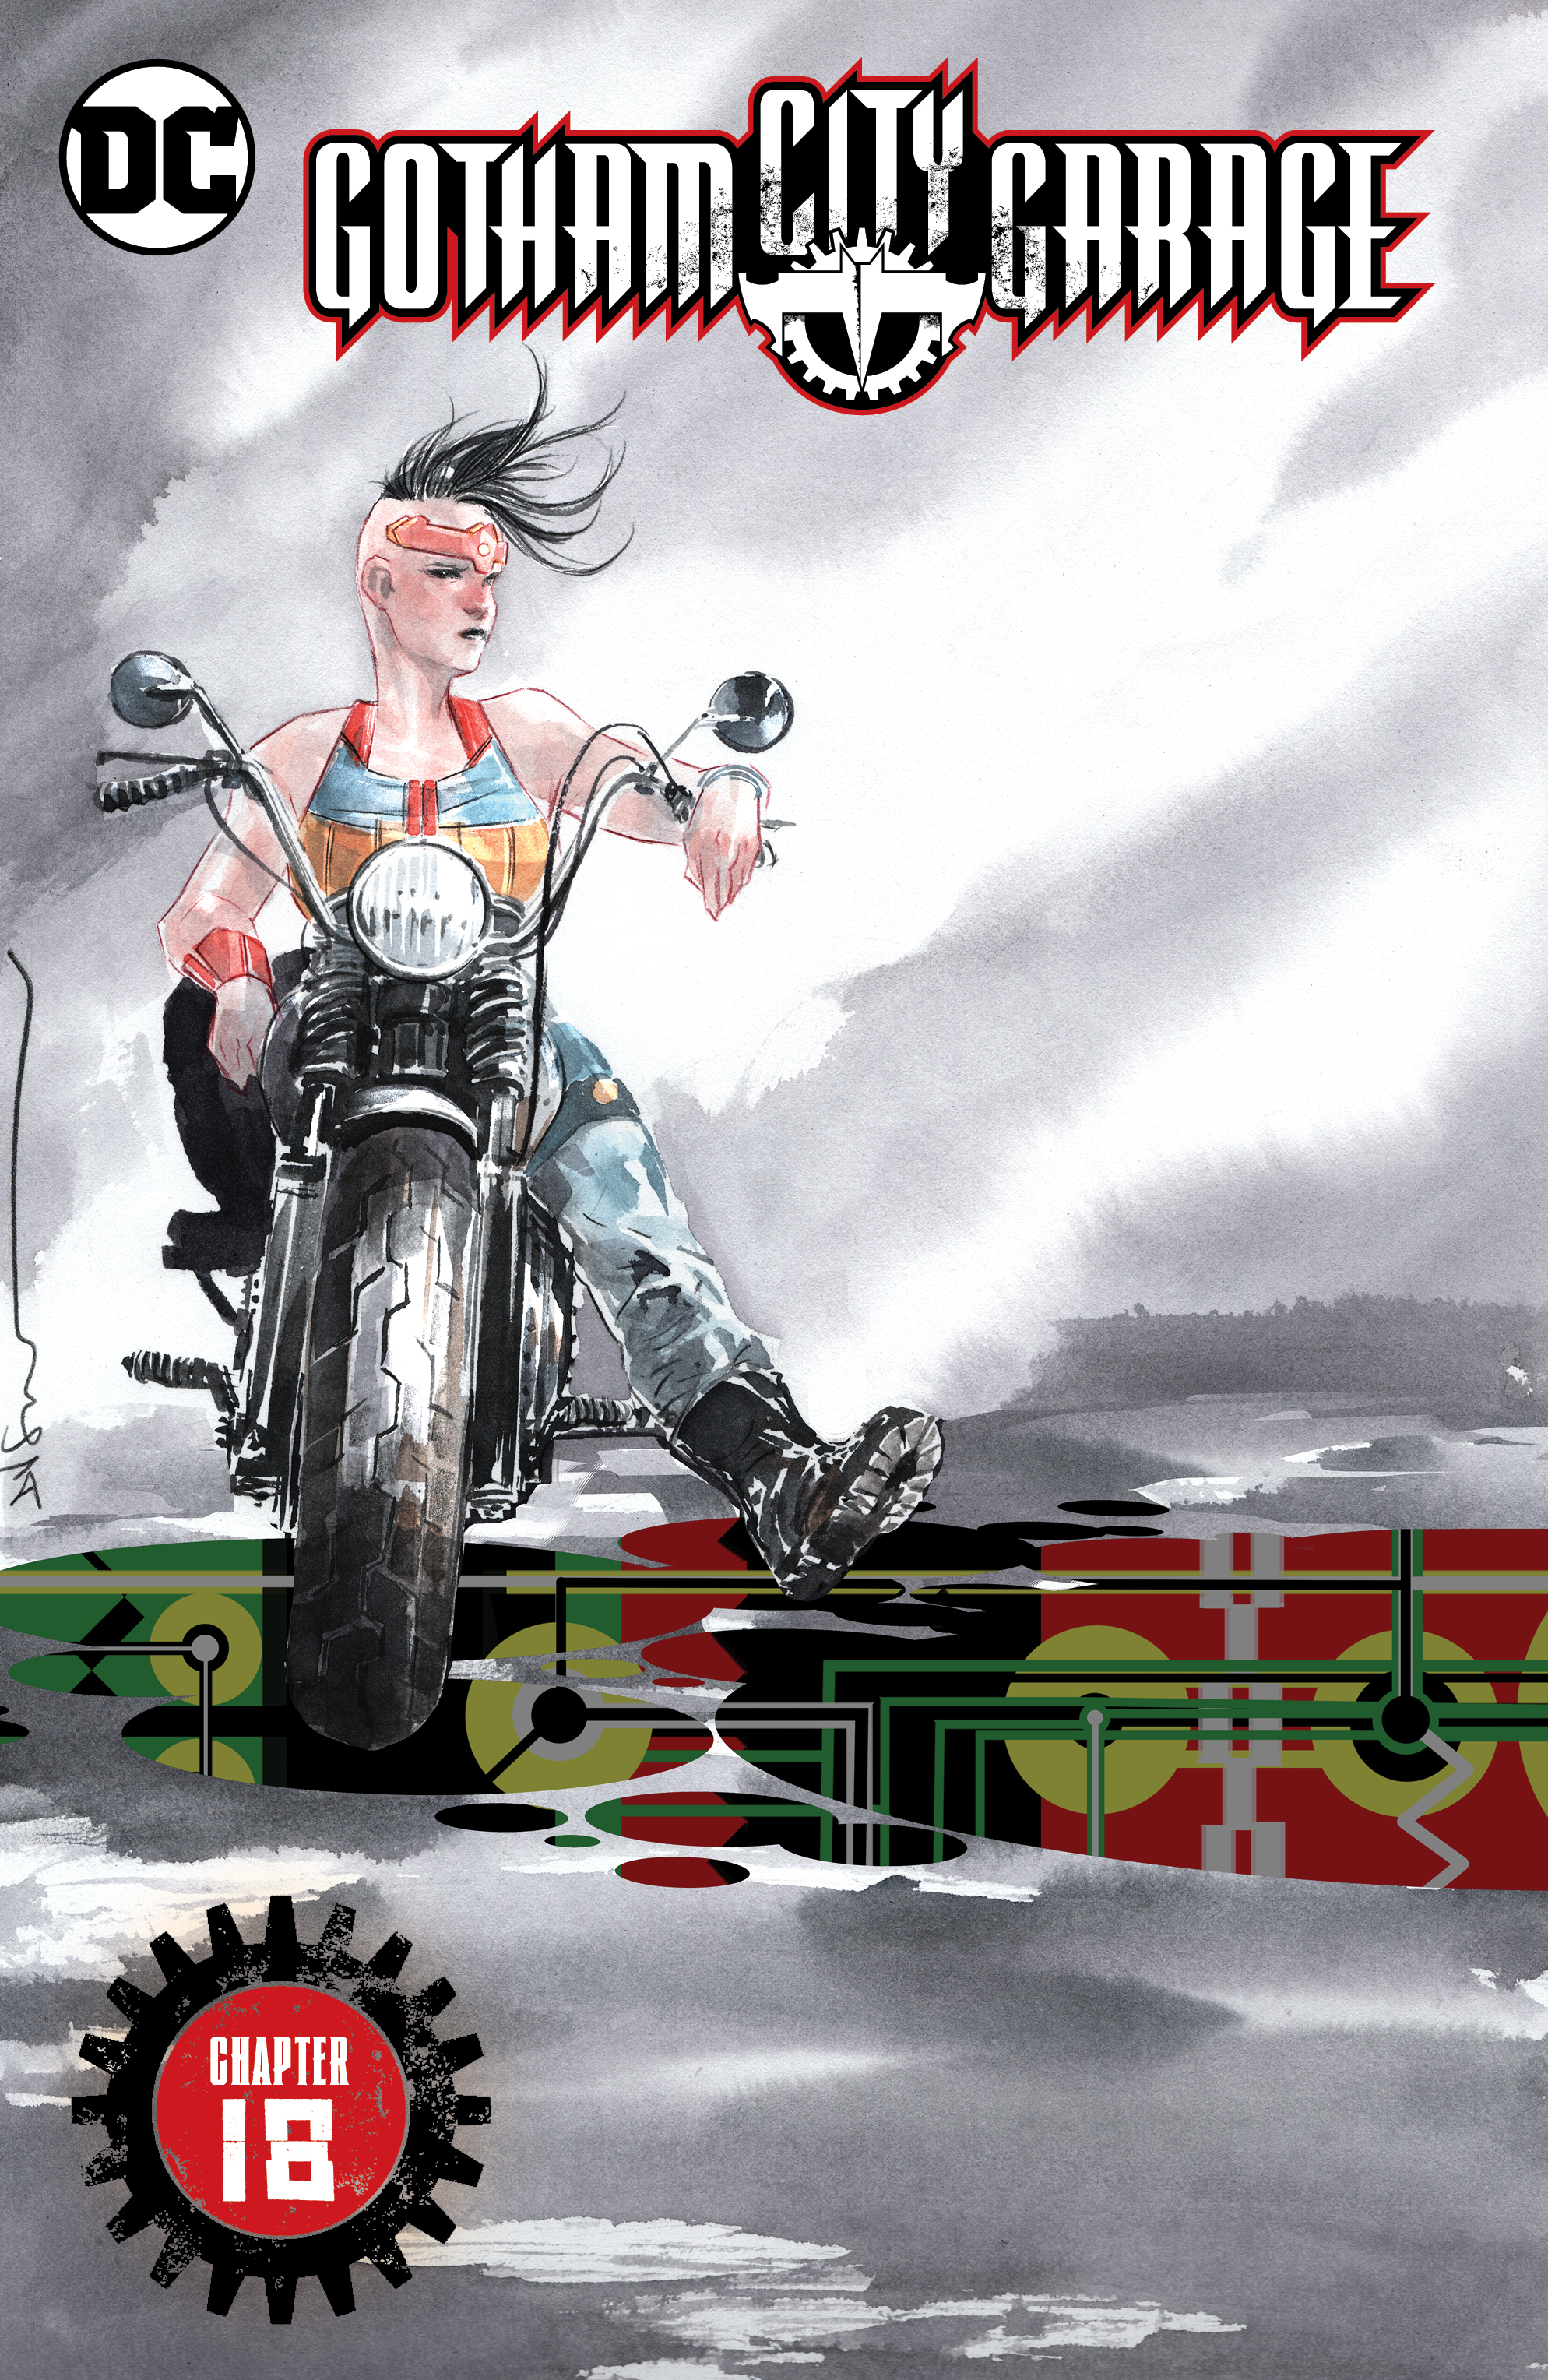 Gotham City Garage #18 preview images